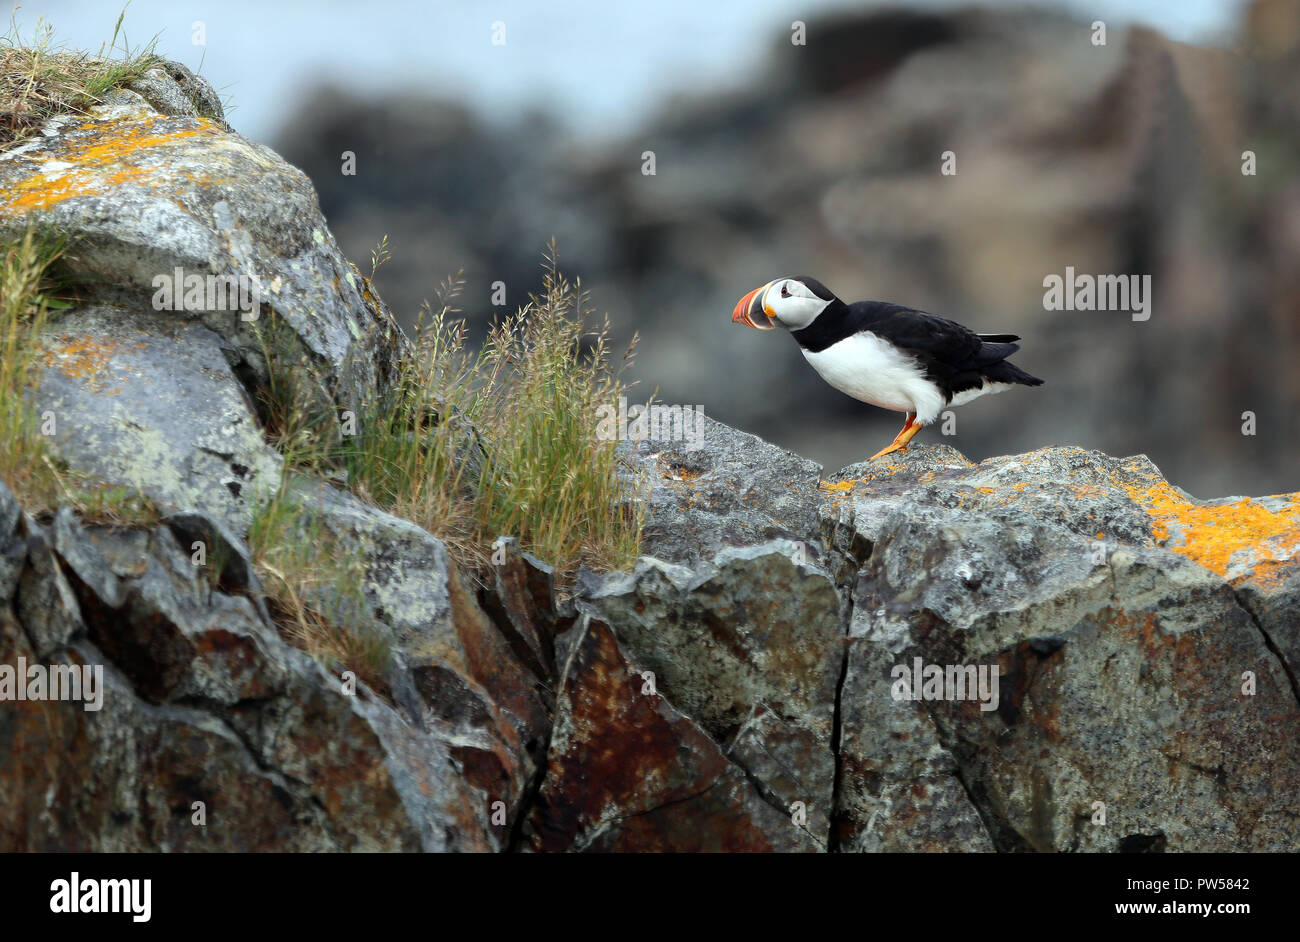 solitary black and white puffin on rocks with orange lichen Stock Photo